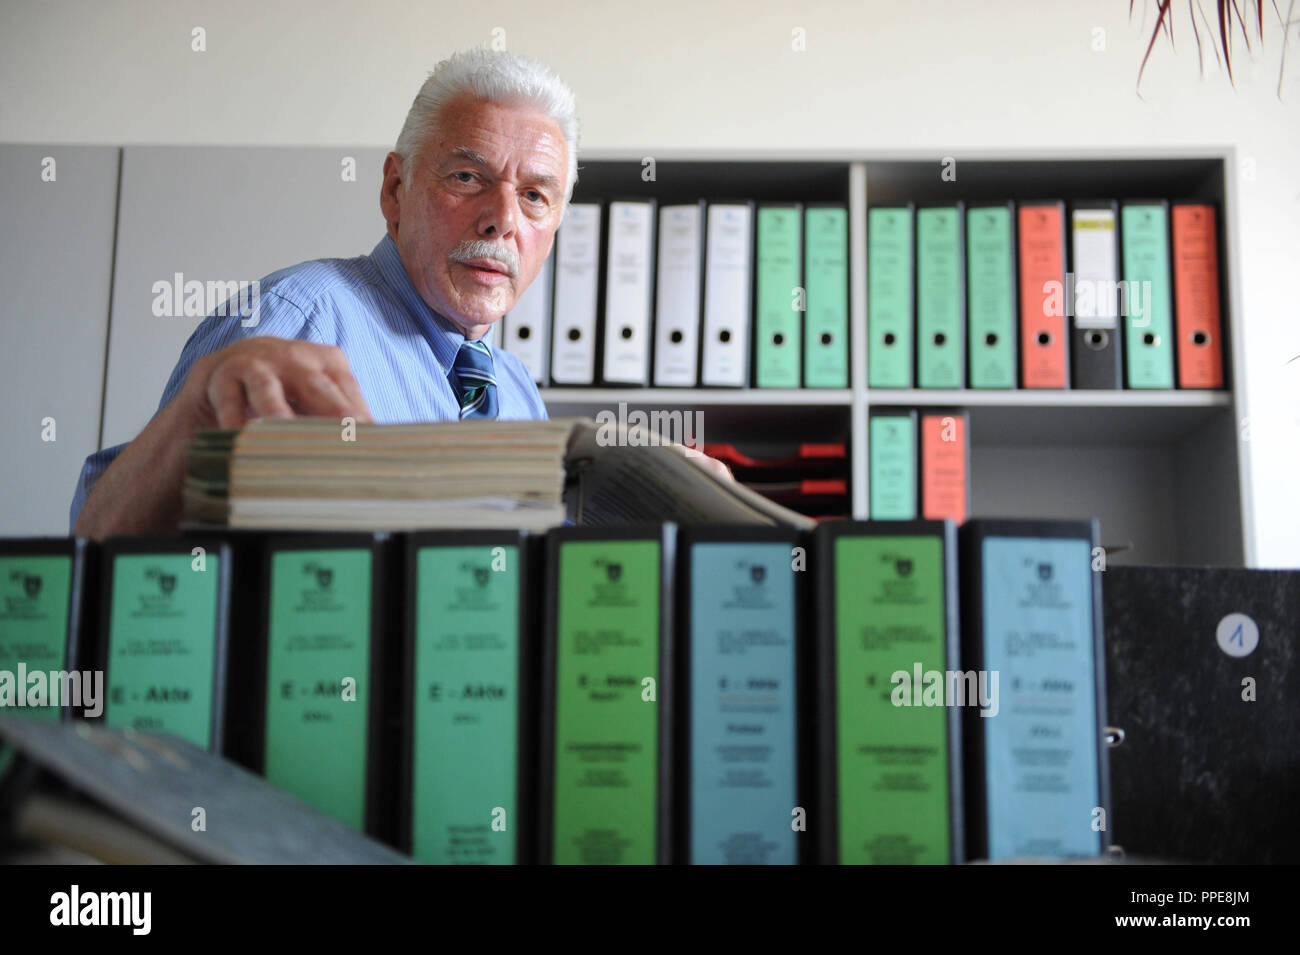 Georg Kull, customs investigator at the Zollfahndungsamt Muenchen (Customs Investigation Office Munich) in the Landsberger Strasse. Together with colleagues the investigator pursued a ring of drug dealers for 10 years. The documentation of the successfully closed case filled 78 file folders. Stock Photo